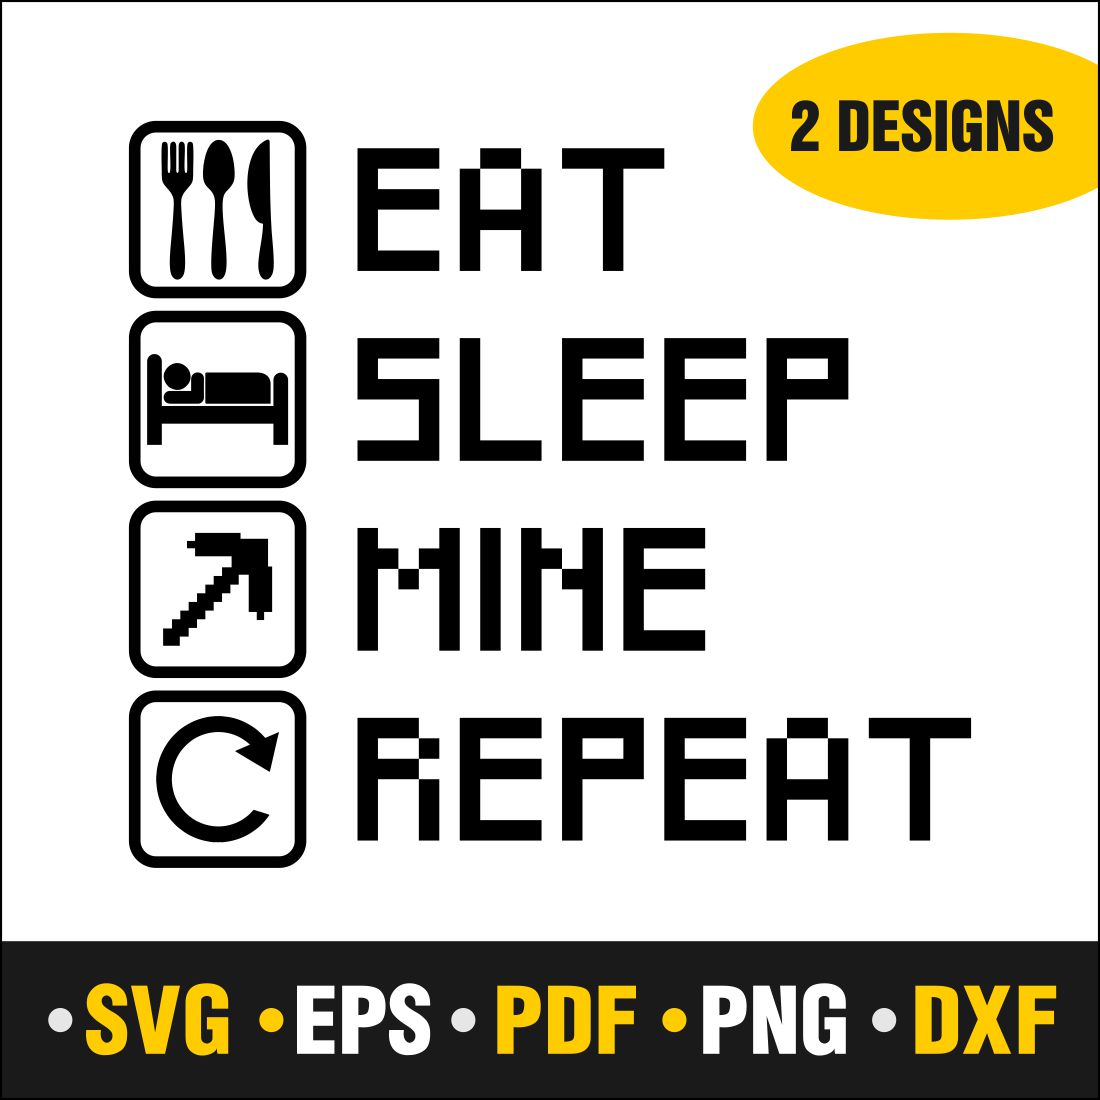 Eat Sleep Mine Repeat Svg, Mine Svg Vector Cut file Cricut, Silhouette, Pdf Png, Dxf, Decal, Sticker cover image.